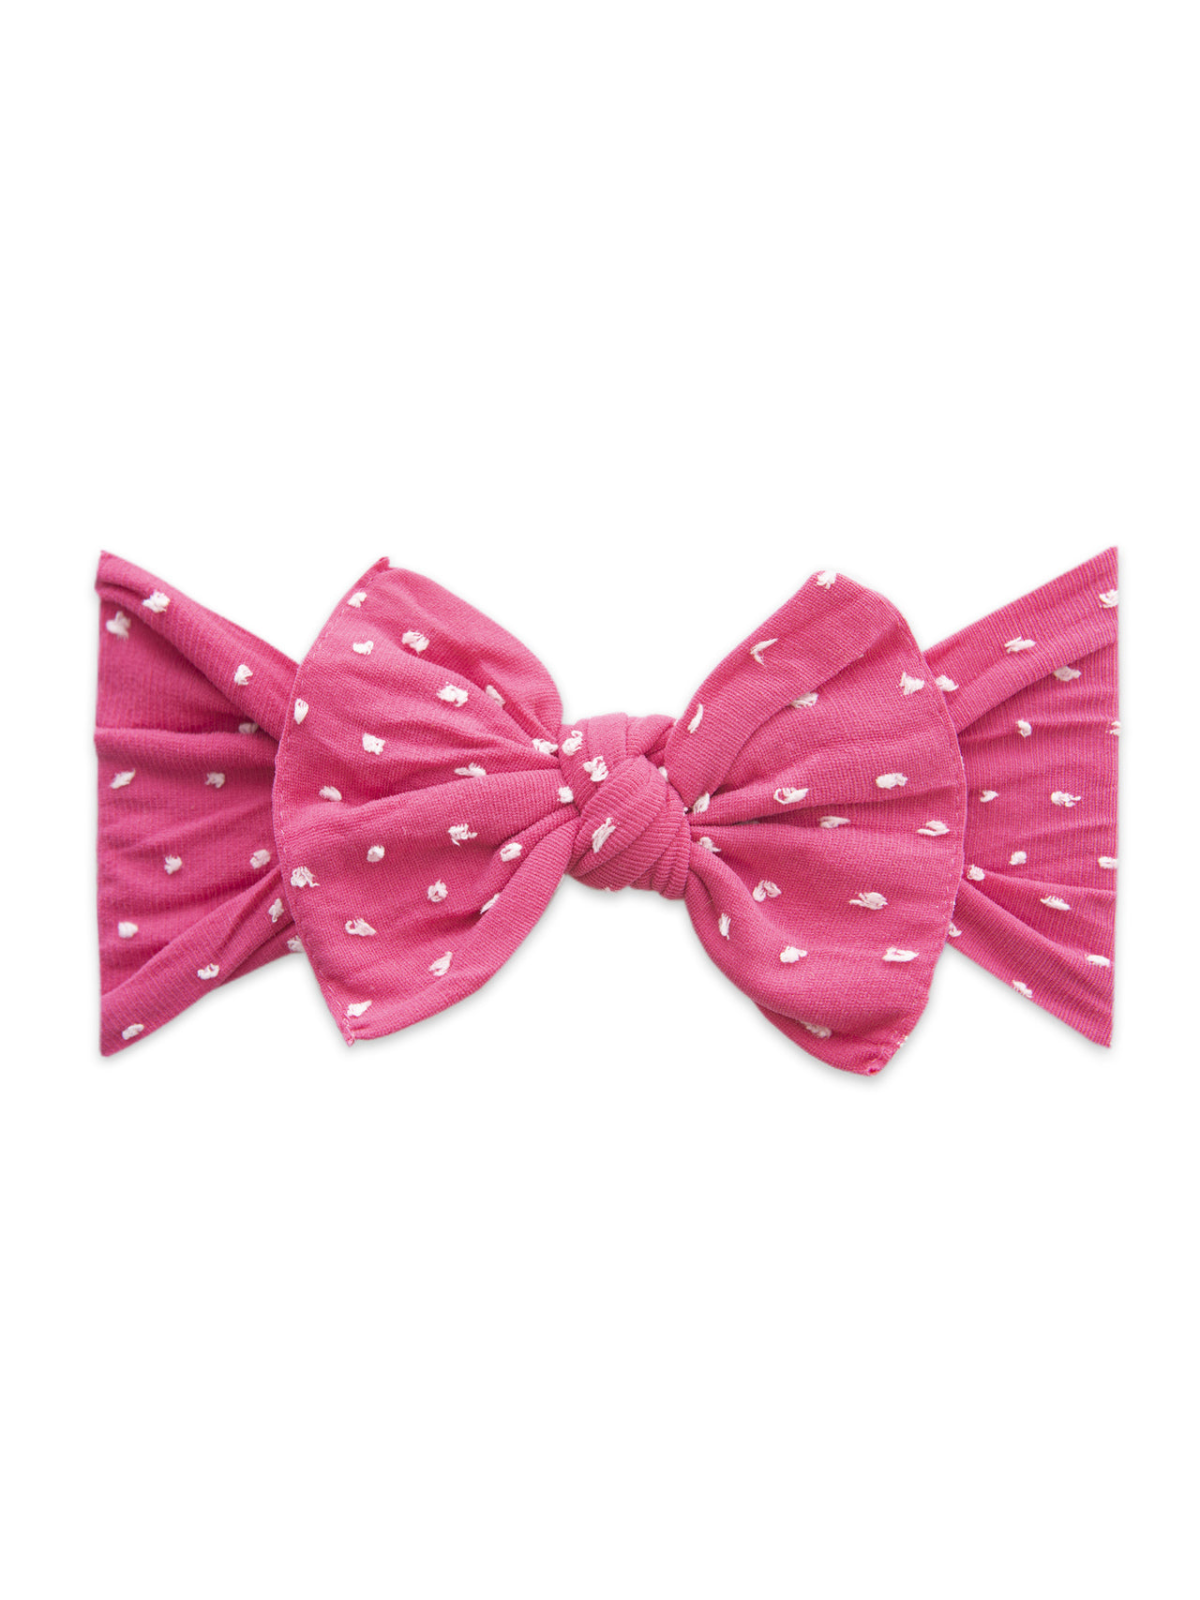 Knot Bow, Shabby Hot Pink Dot